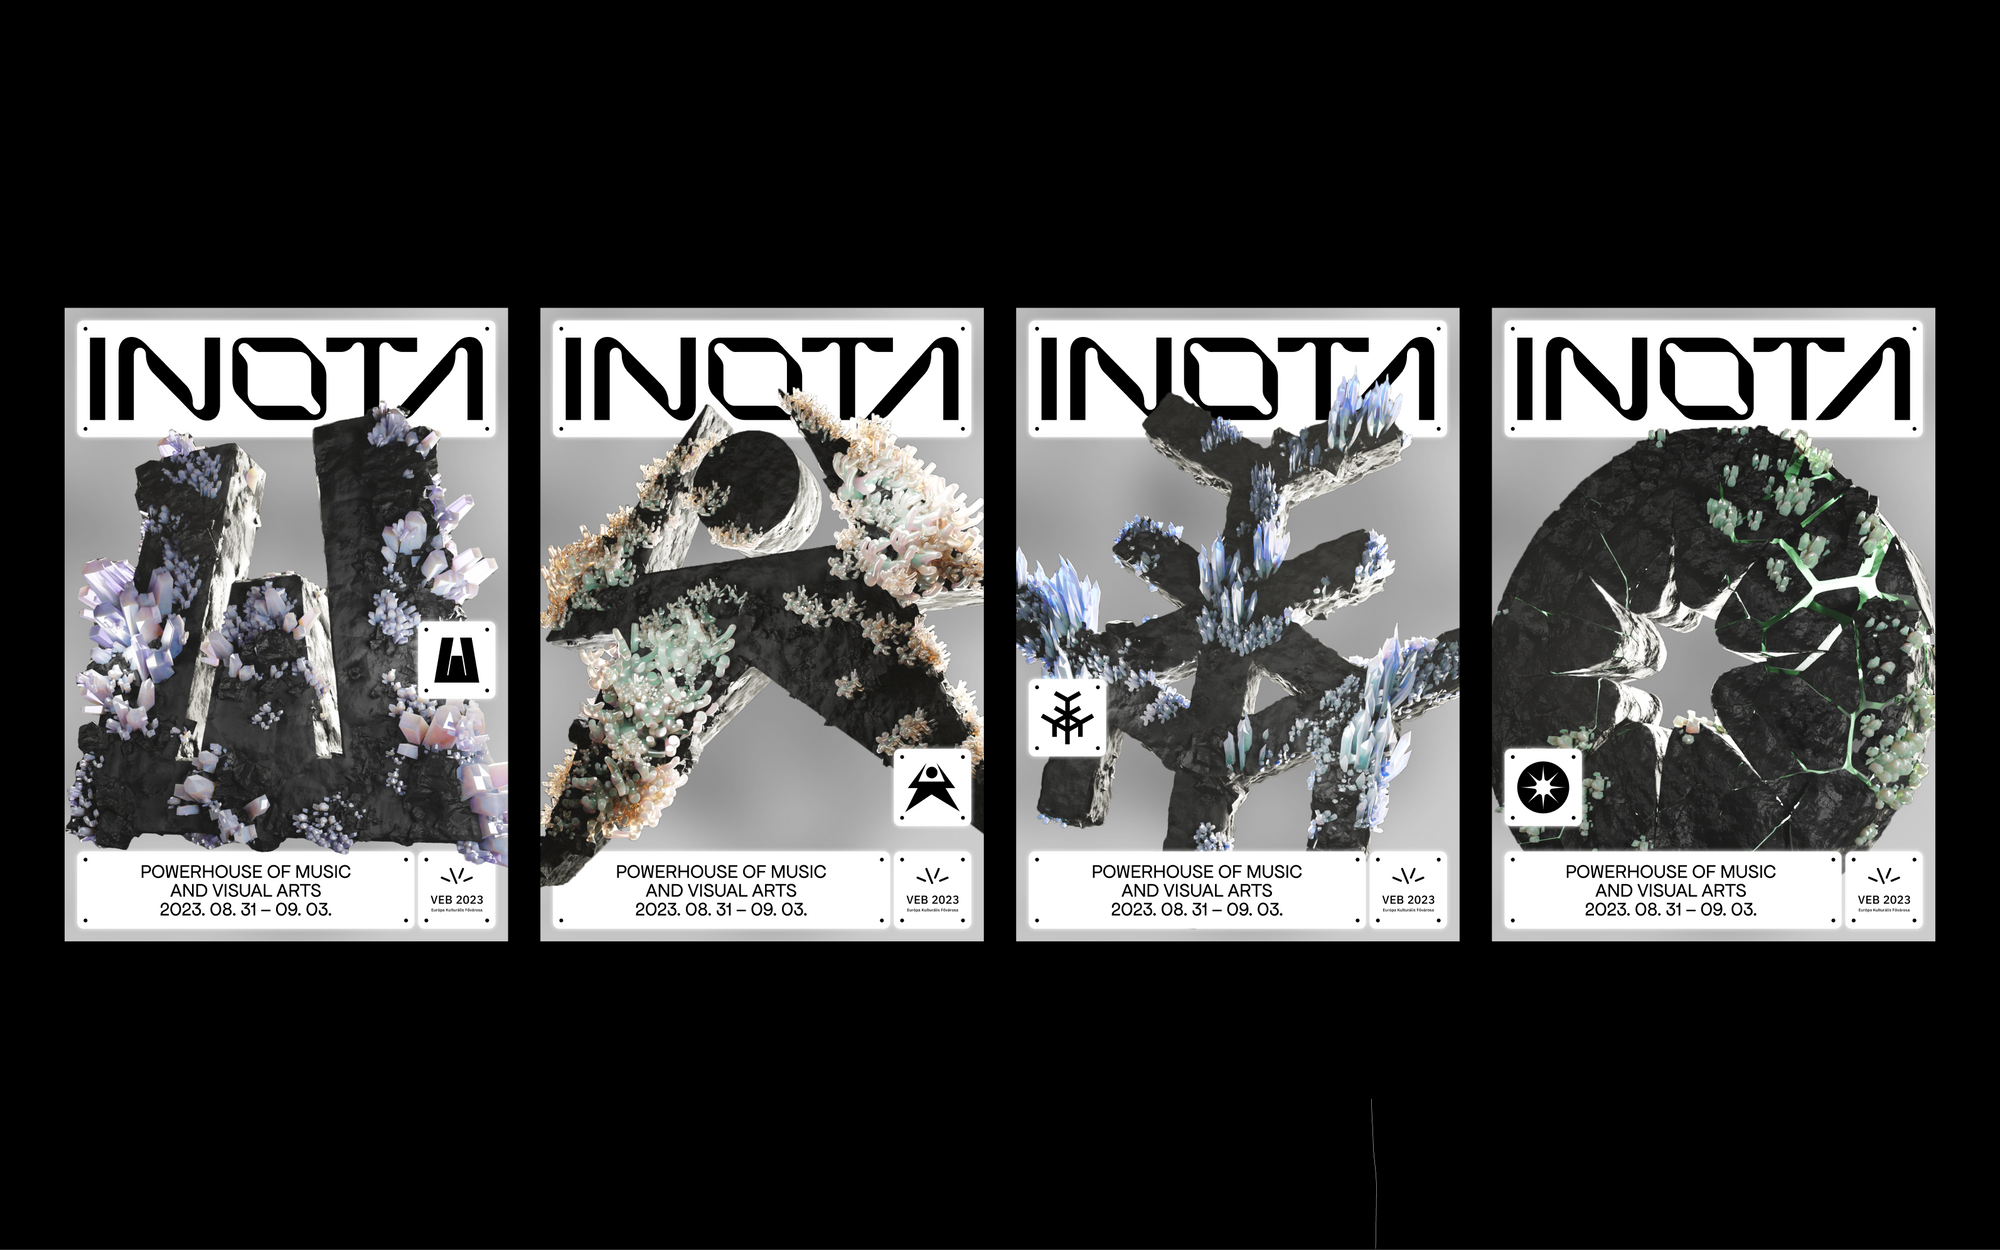 A real industrial audiovisual experience | The INOTA Festival is coming soon!